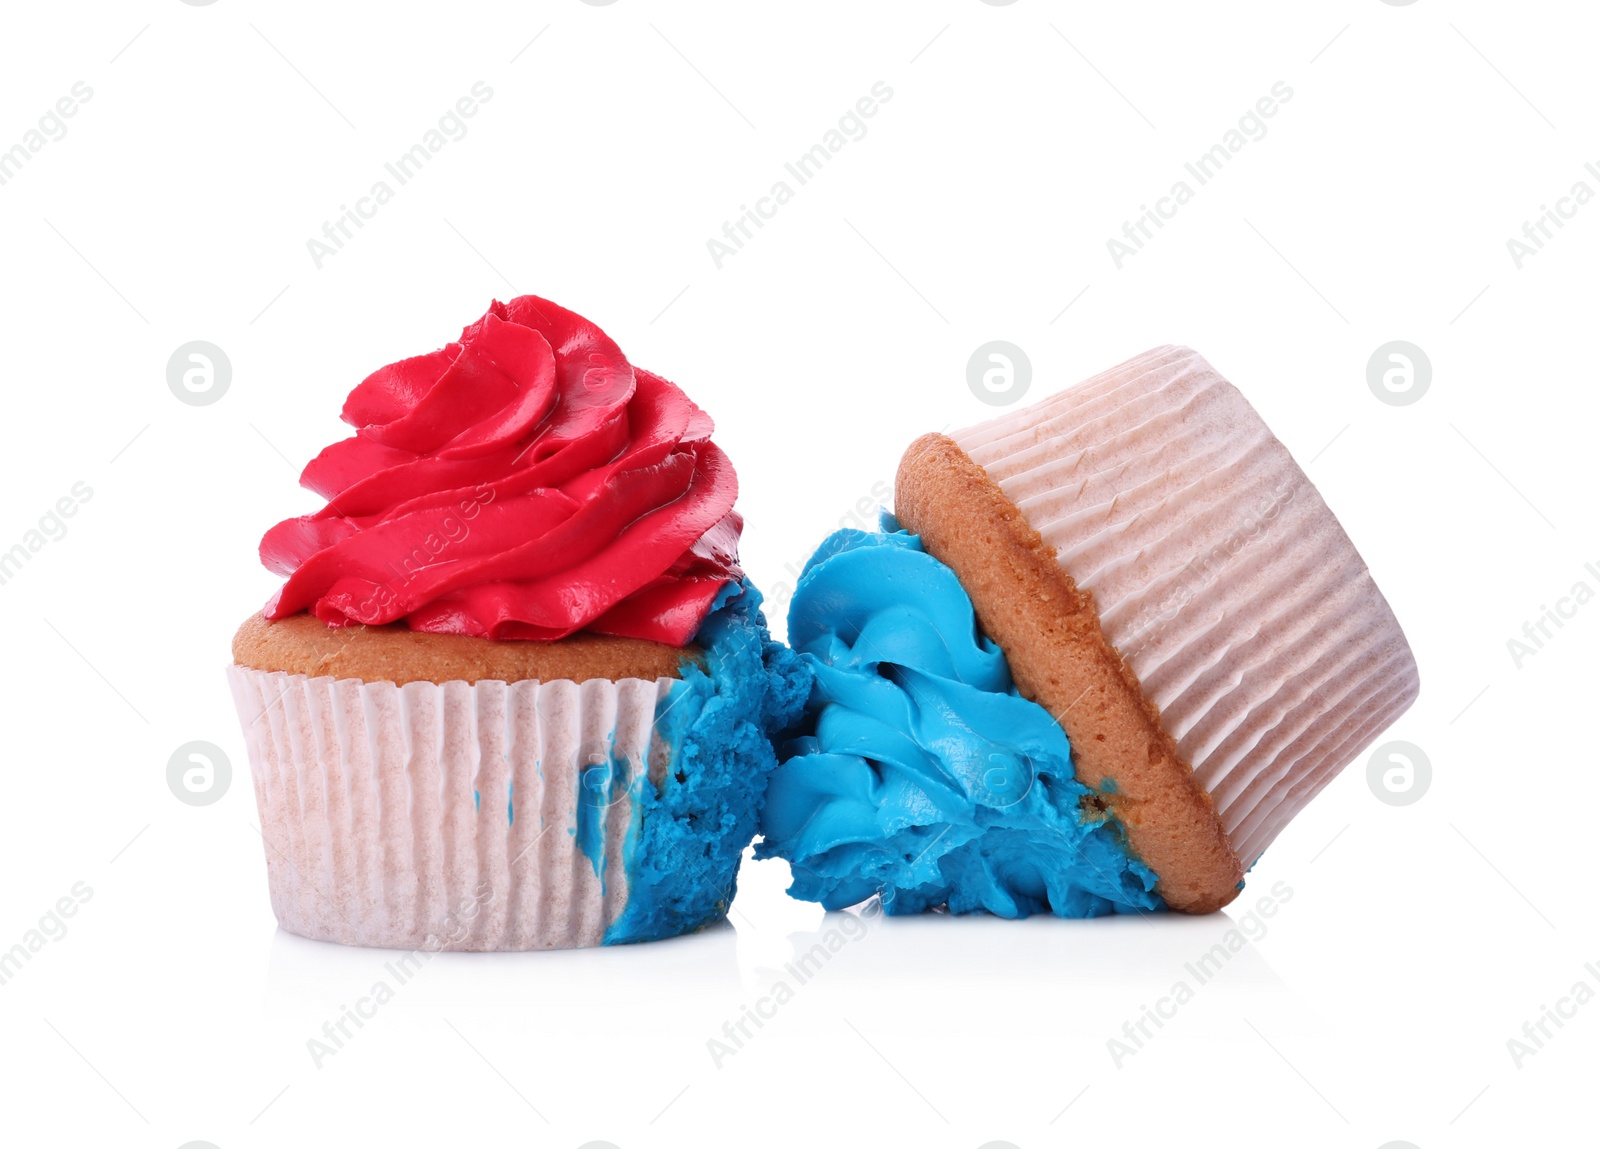 Photo of Two failed cupcakes with cream on white background. Troubles happen